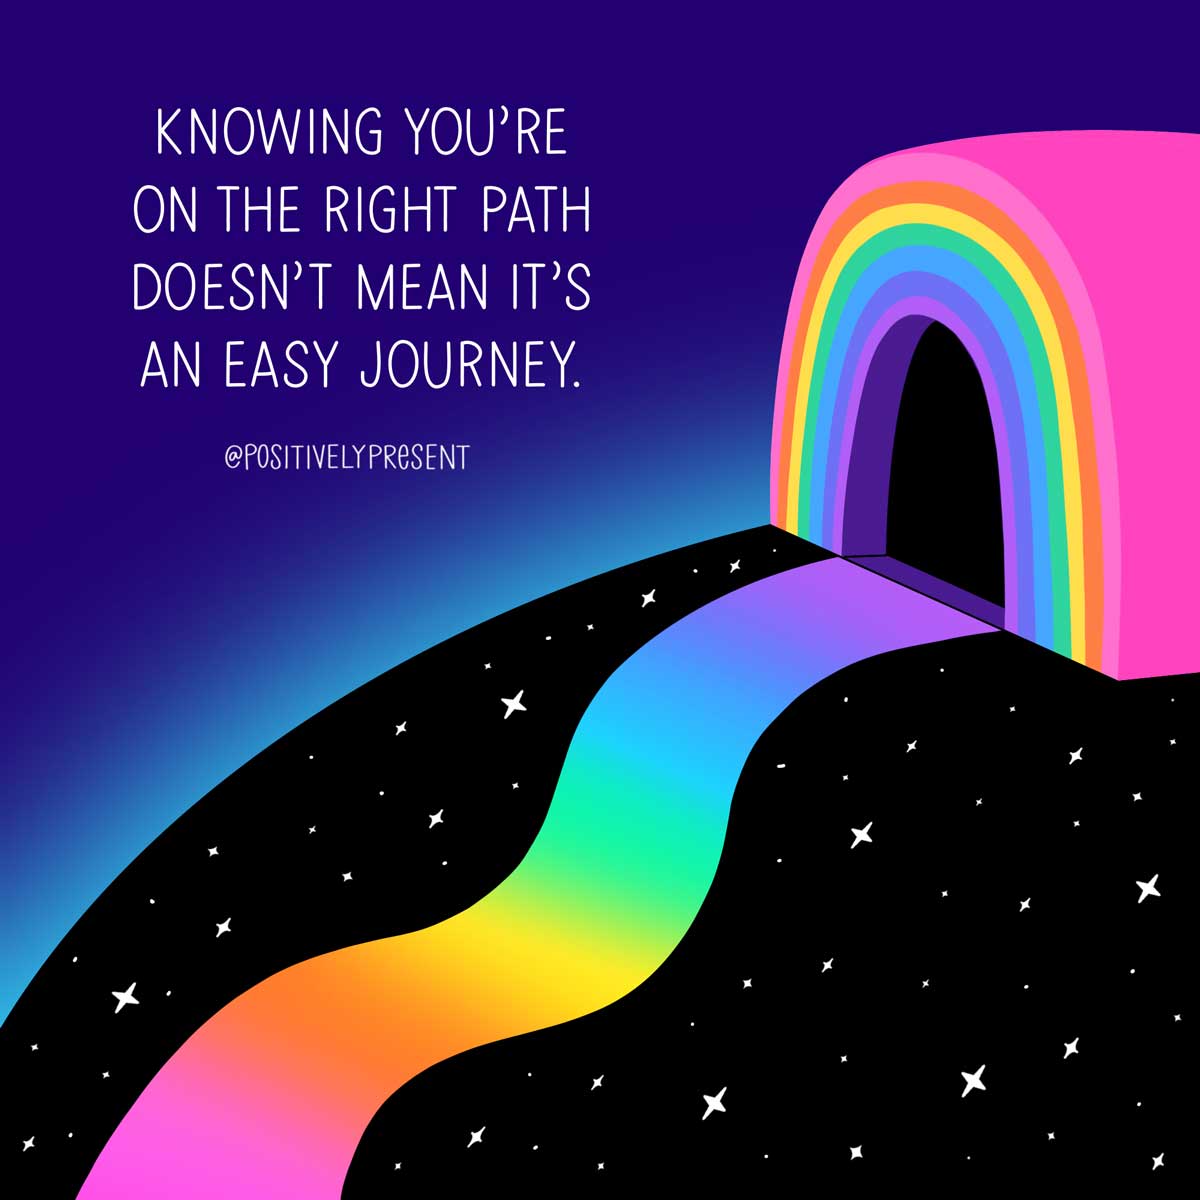 rainbow arch over colorful path says knowing you're on the right path doesn't mean it's an easy journey.